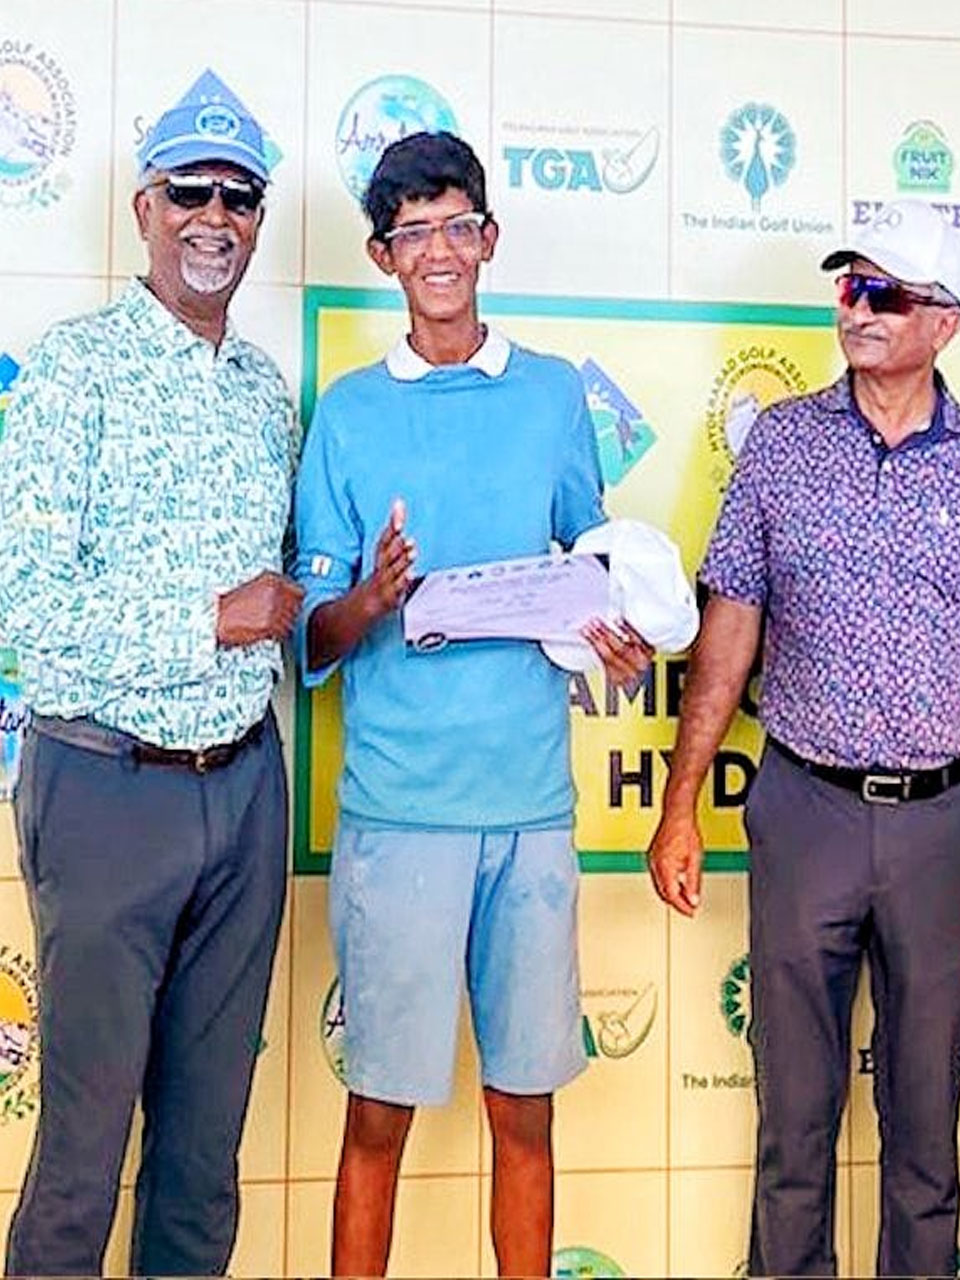 Sumith Chandra wins his first Zonal Amateur Event at the HGA South Zone Amateur Golf Championship